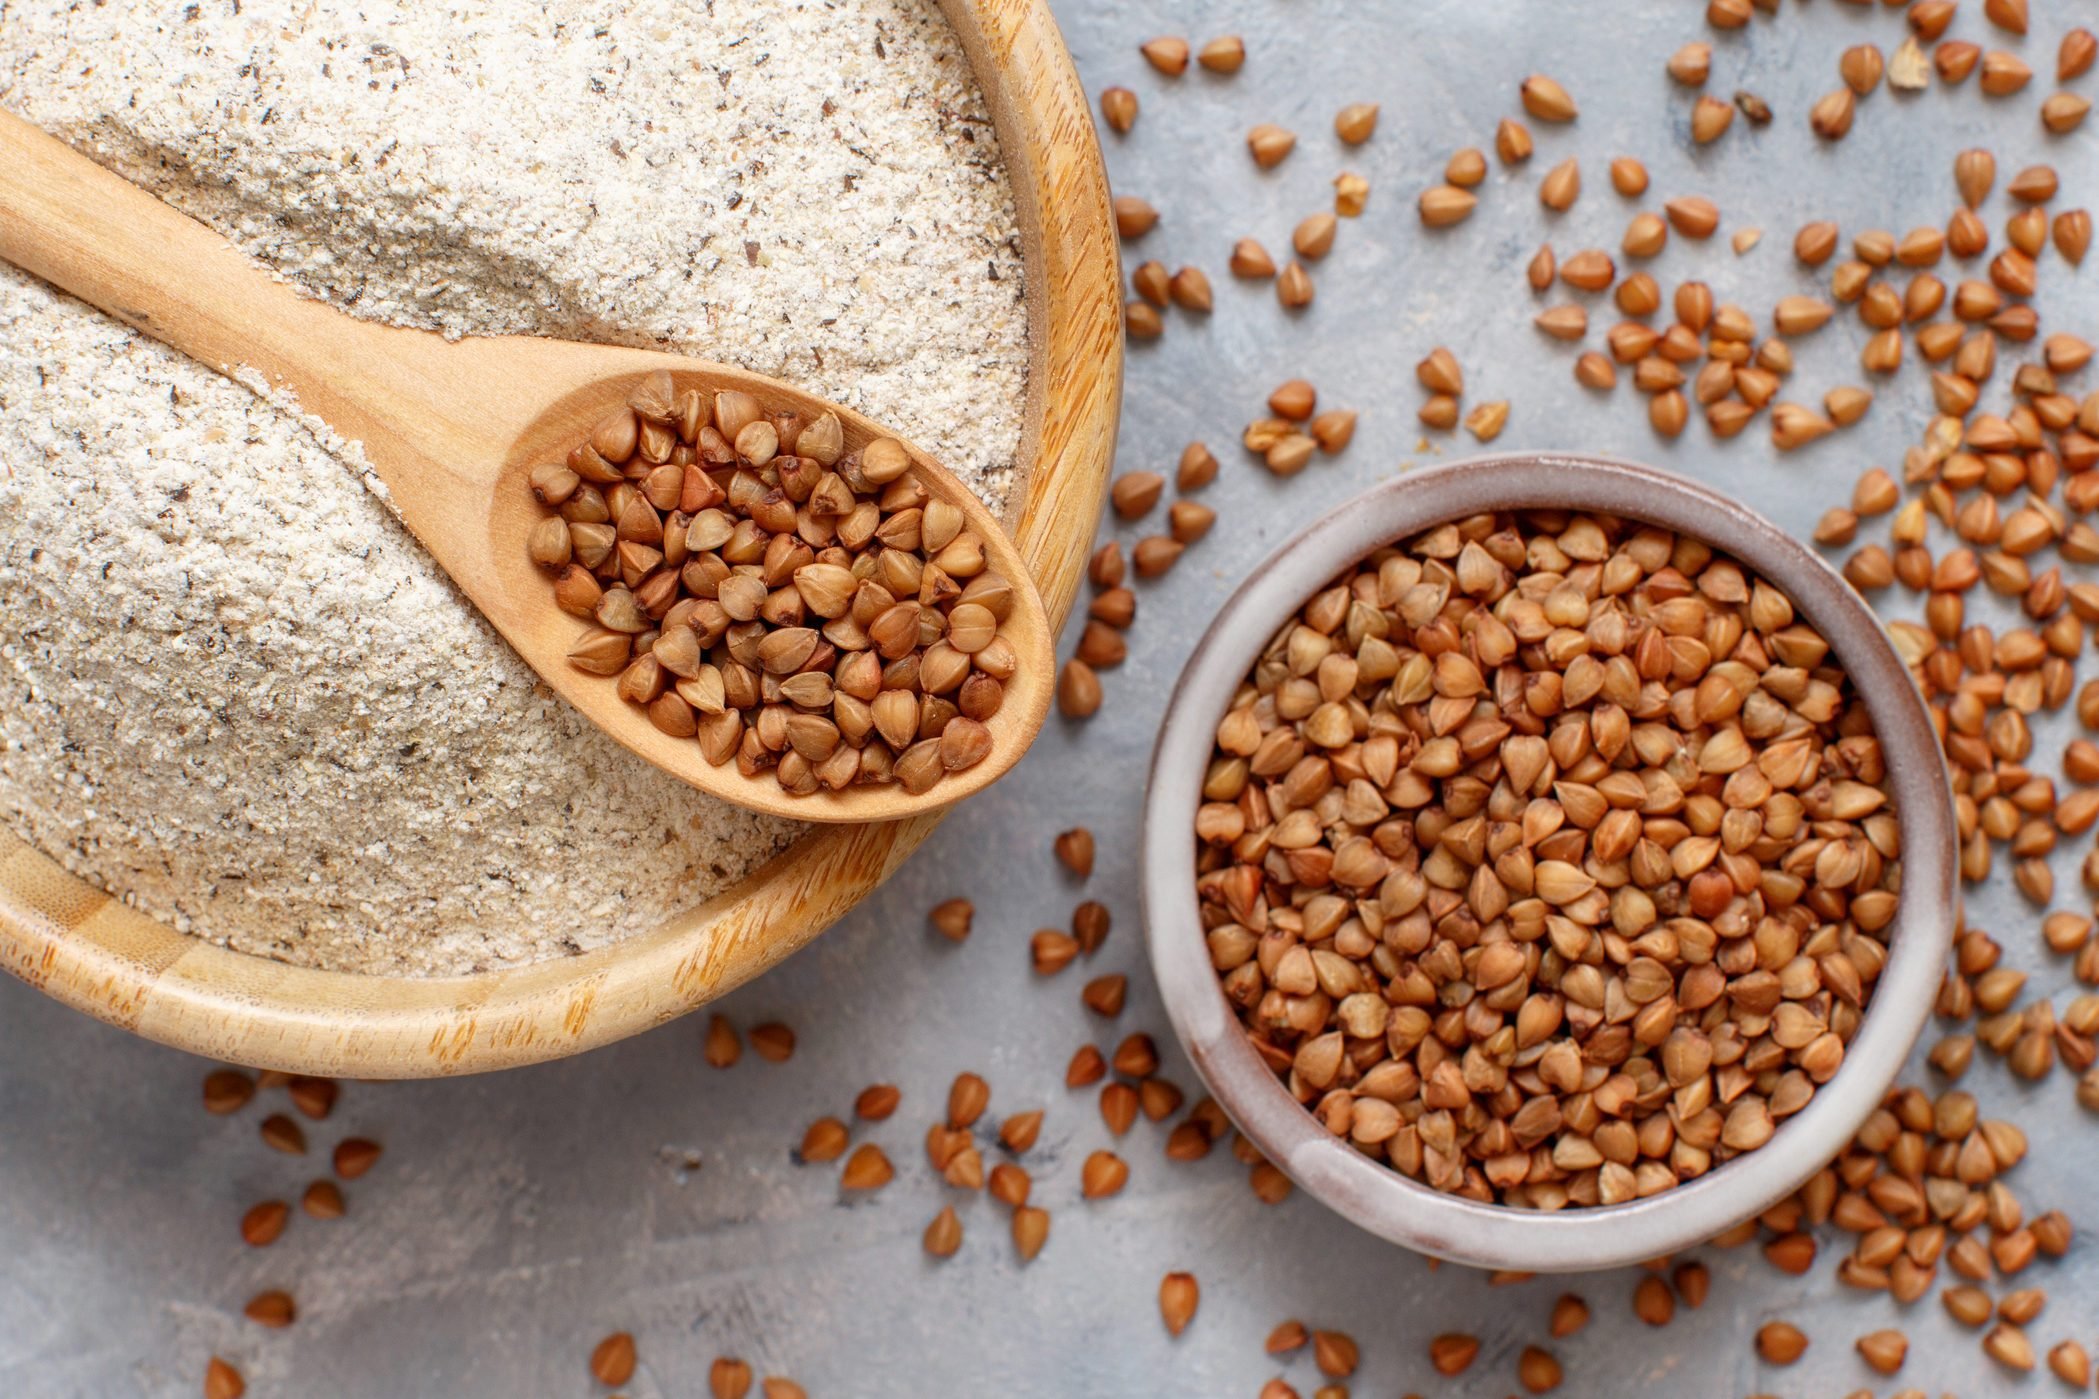 Buckwheat: Health Benefits, Nutrition Facts, and How to Eat It